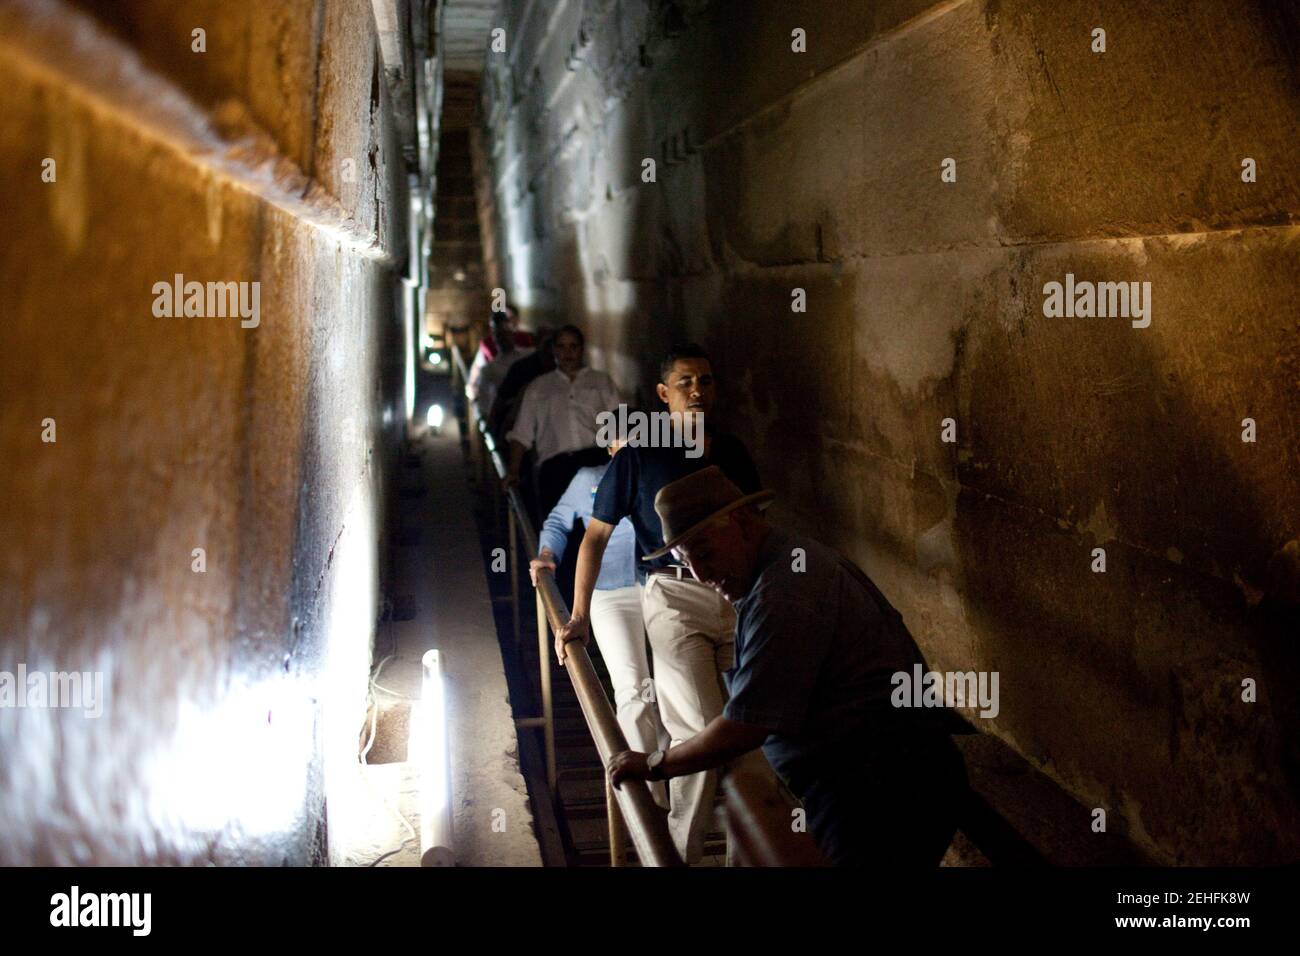 President Barack Obama carefully descends a steep flight of steps on a tour of the Pyramids of Giza with Senior Staff in Egypt on June 4, 2009. Stock Photo